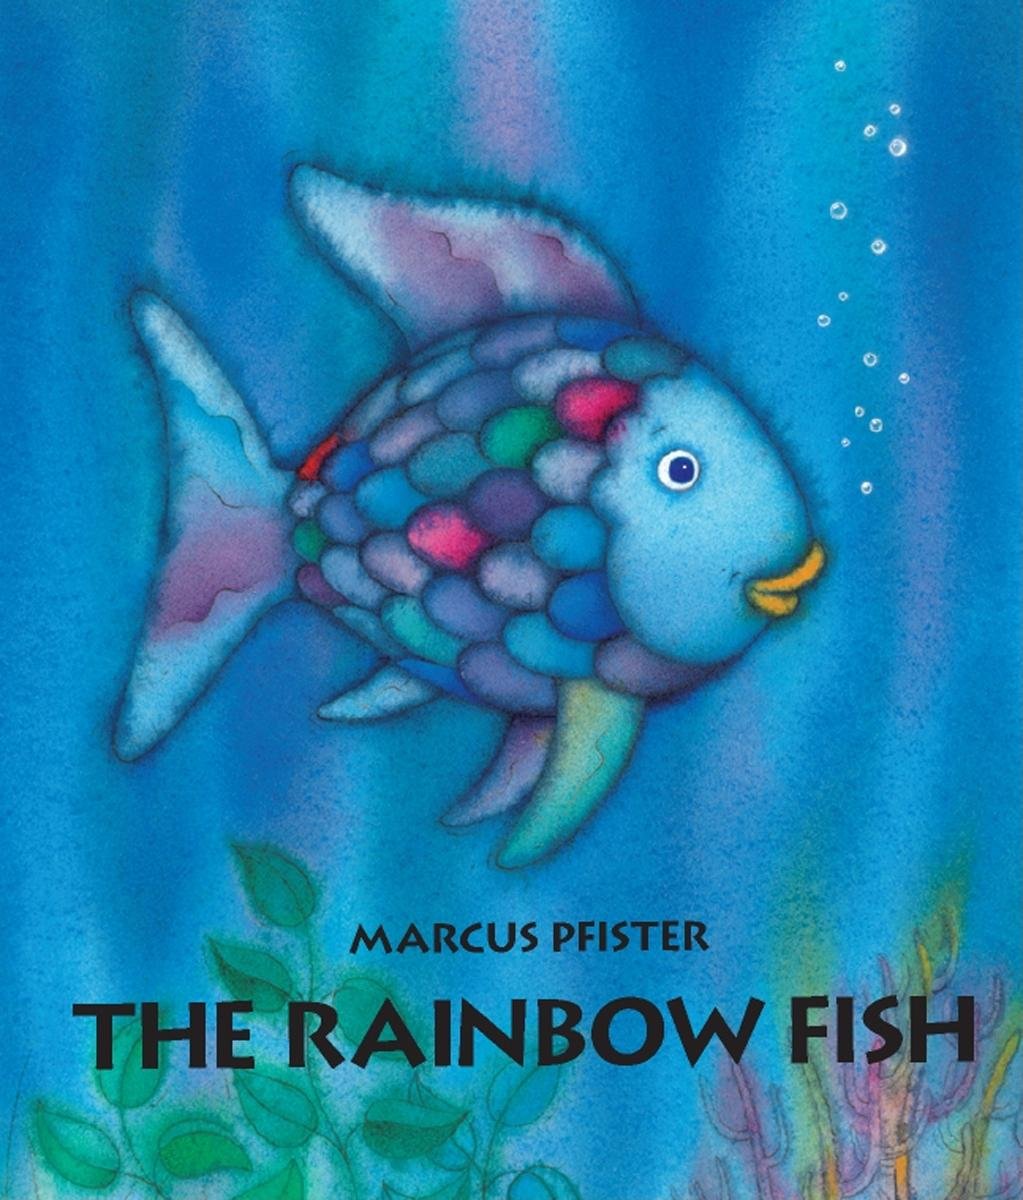 Fish On Kids: A Children's Book Series That Promotes Fishing and